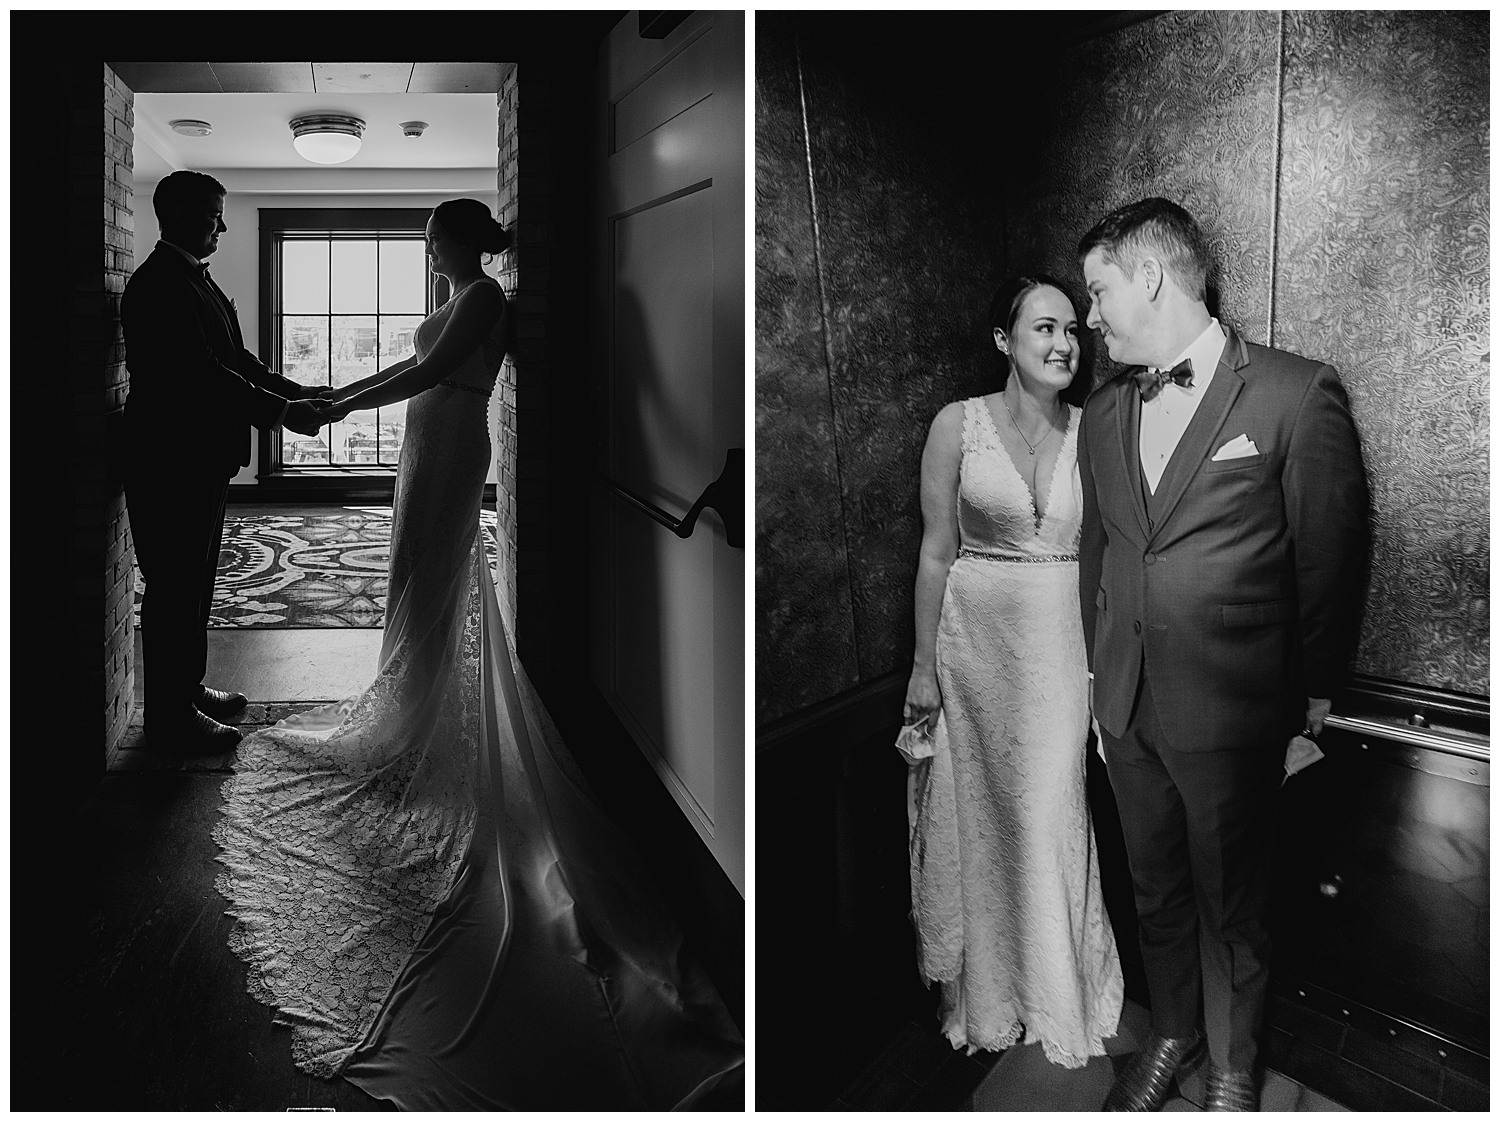 A couple to be married at Hotel Emma pose for a couple of pictures silhouetted against the window and later capture candid photographs in an elevator